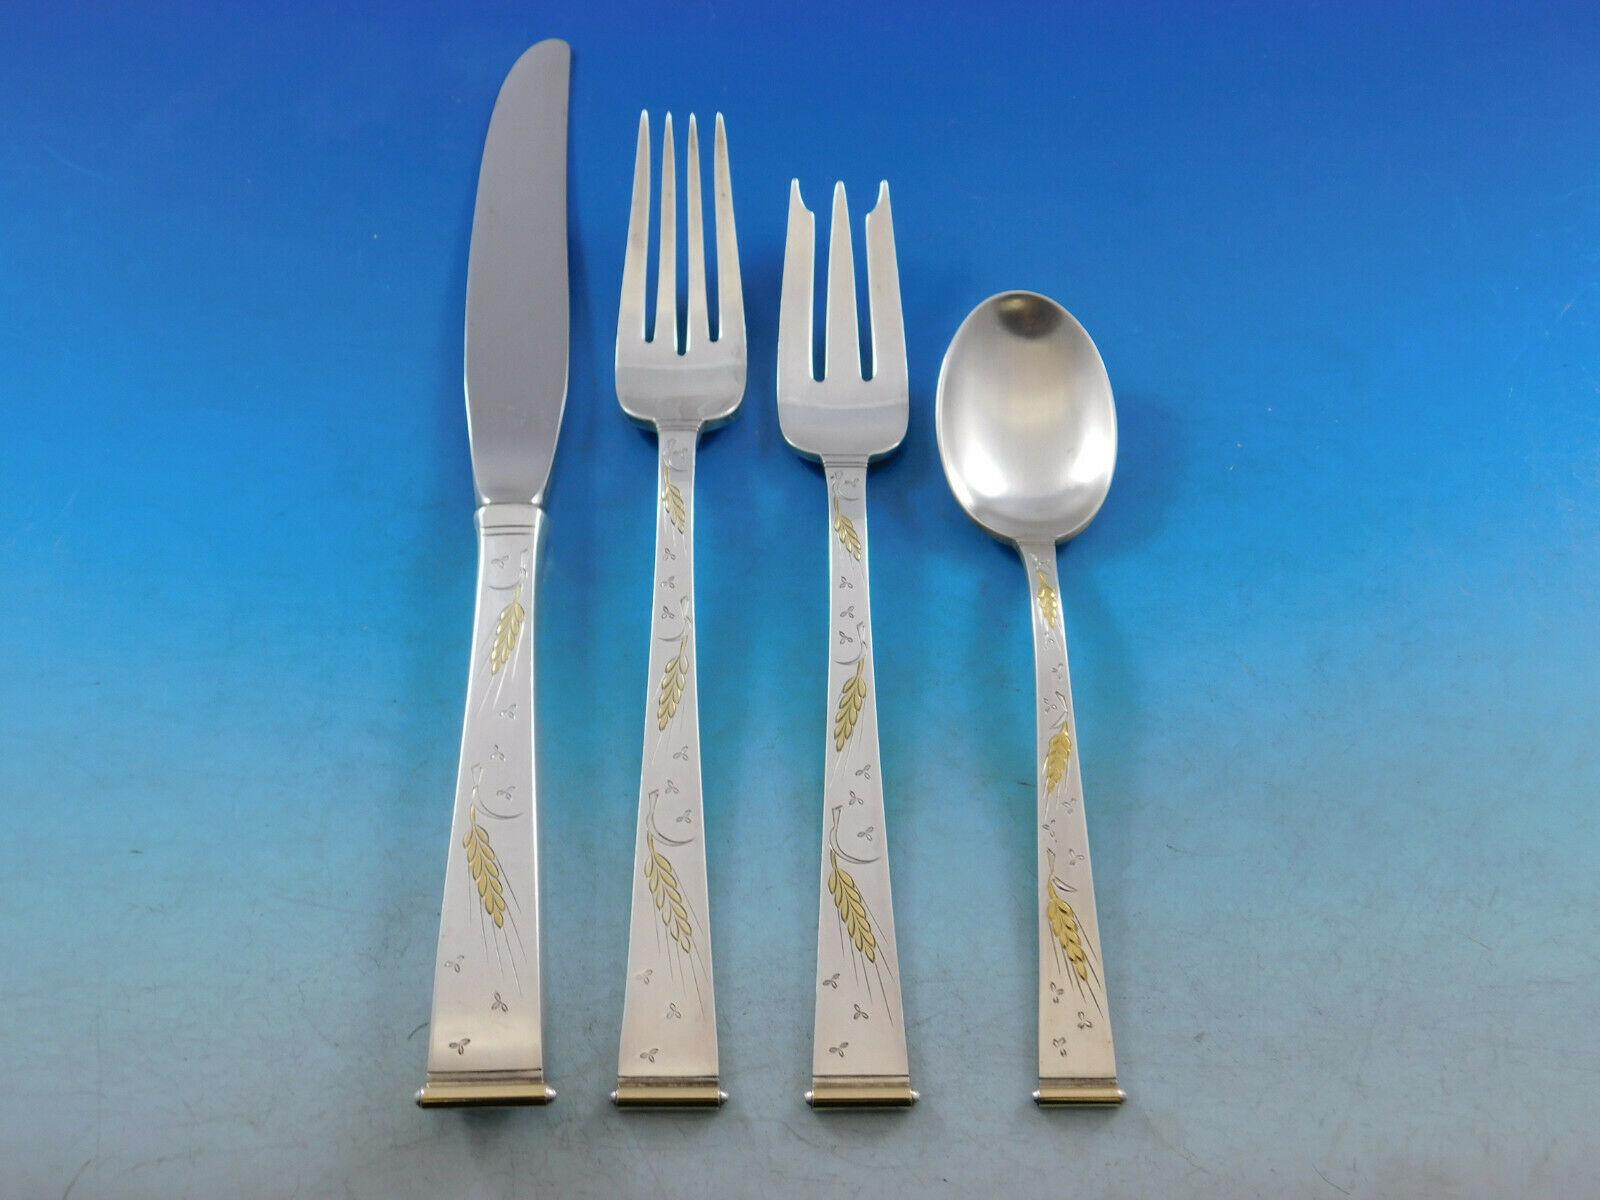 Golden wheat by Gorham sterling silver flatware set - 58 pieces. This set includes:
8 Knives, 9 1/4